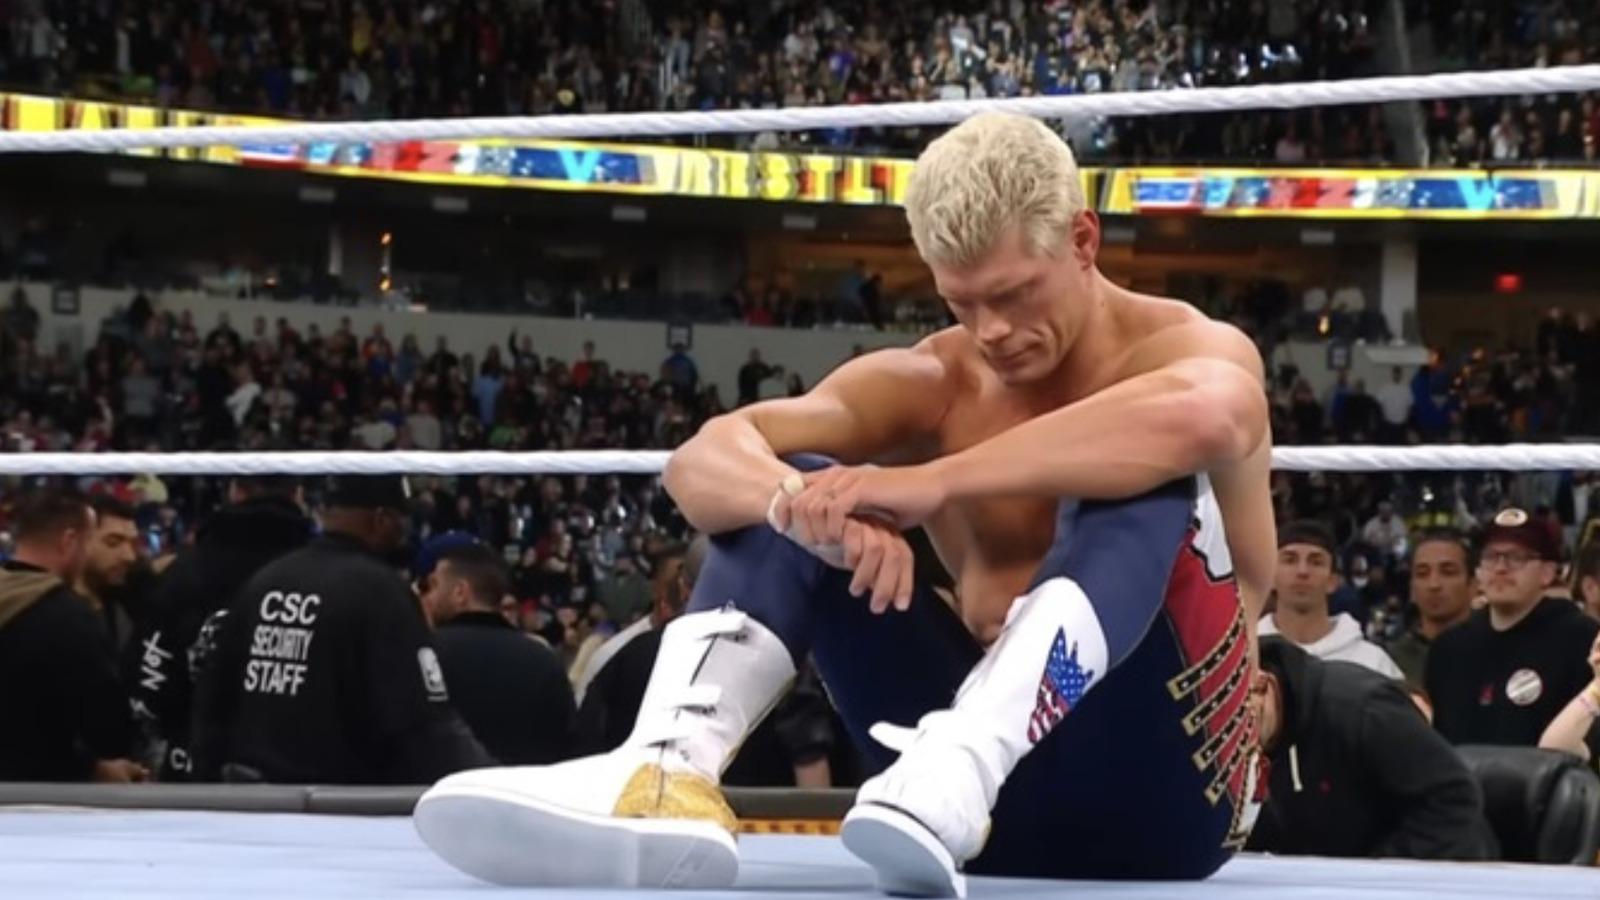 Cody Rhodes revealed a shocking detail about his crushing loss at Wrestlemania 39